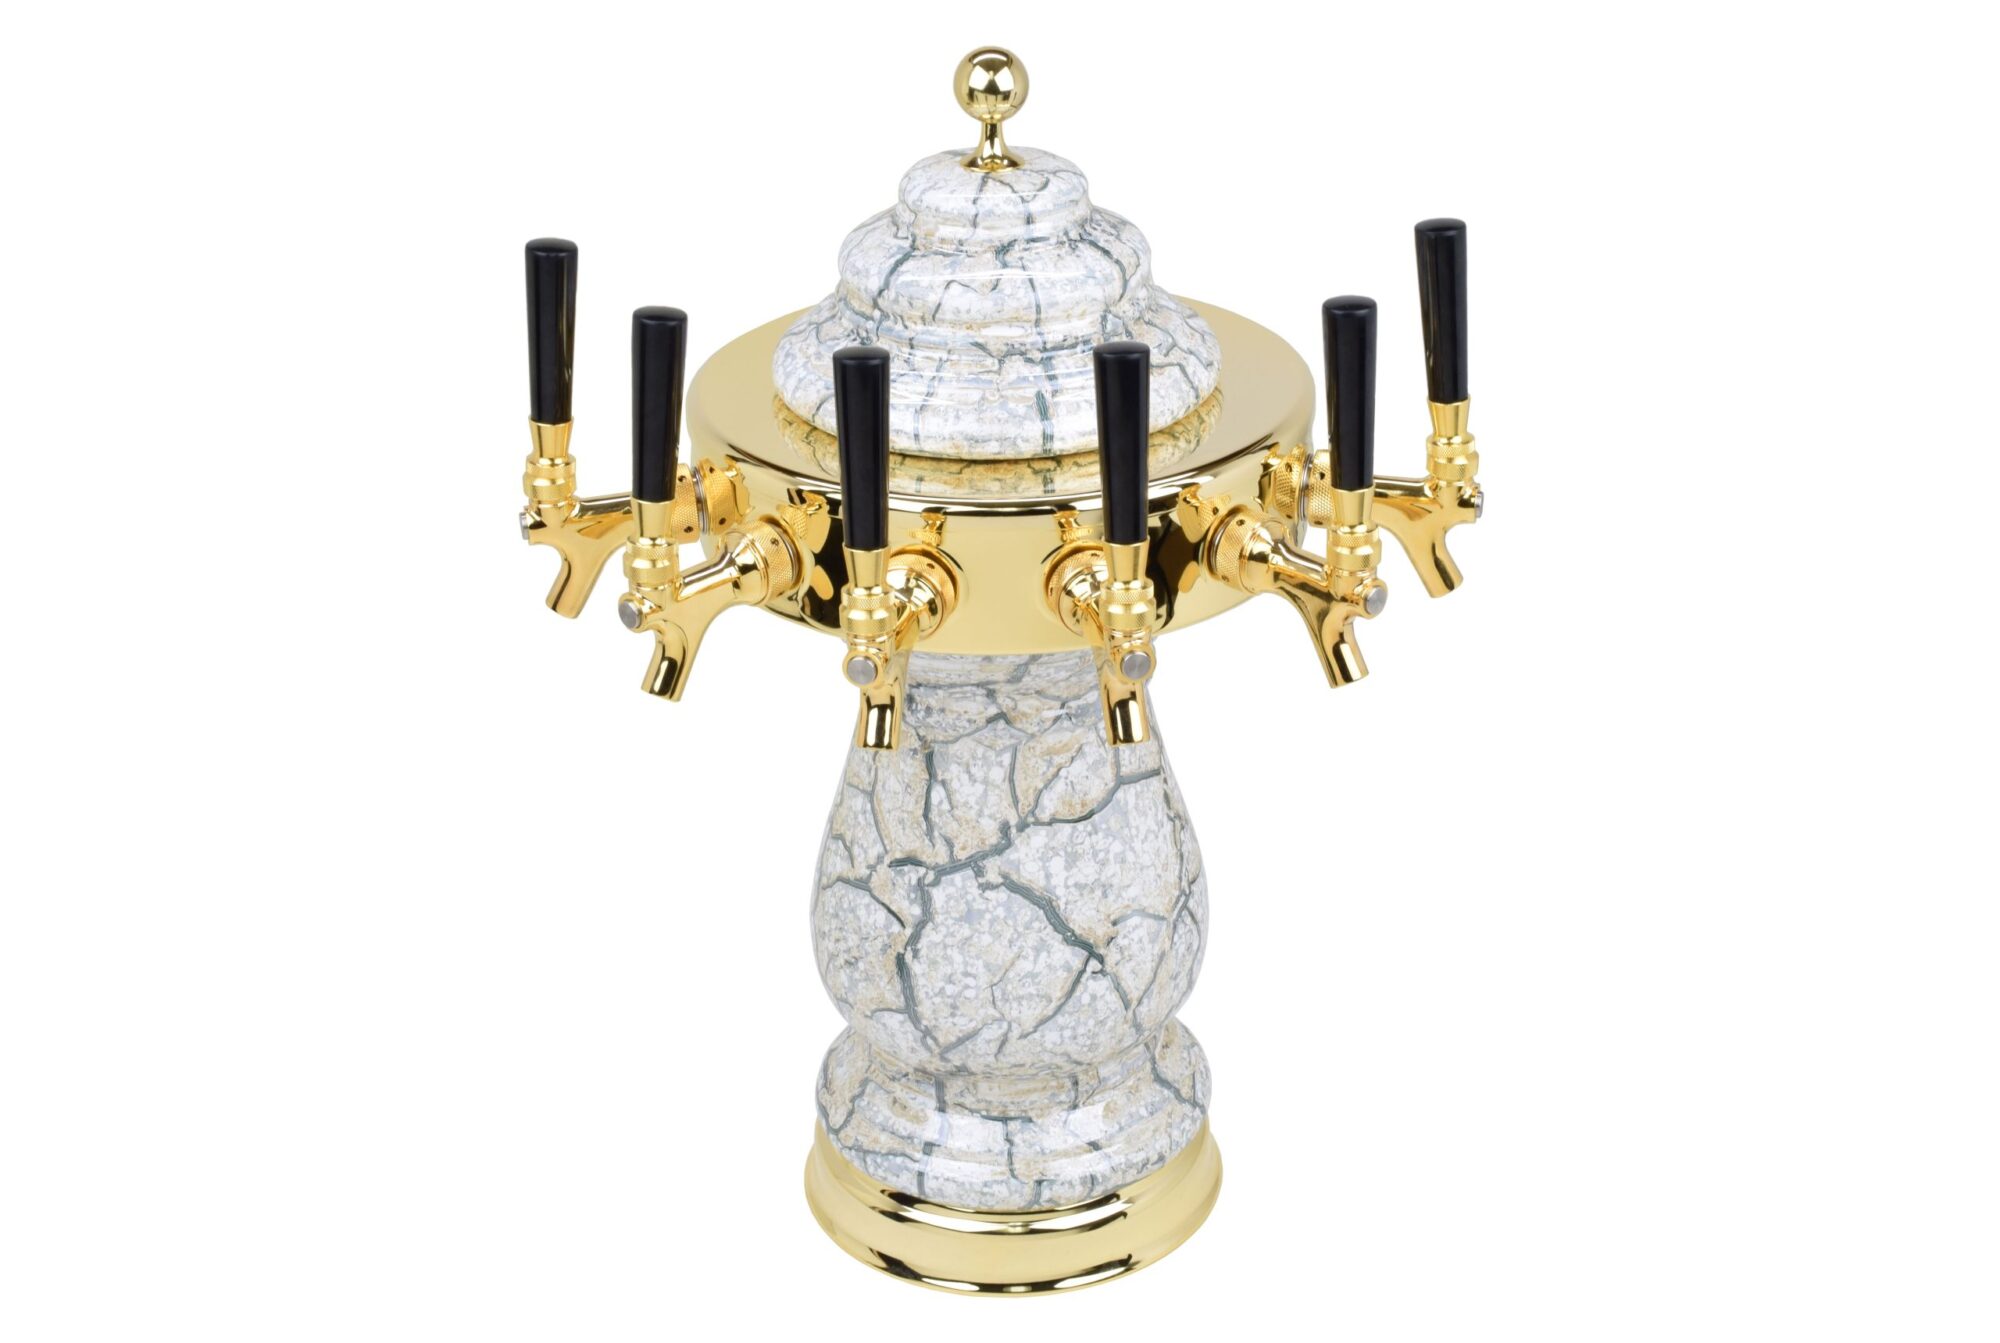 884B-6BeigeMarble Six Faucet Ceramic Tower with PVD Gold Hardware and Faucets - Shown in Beige Marble